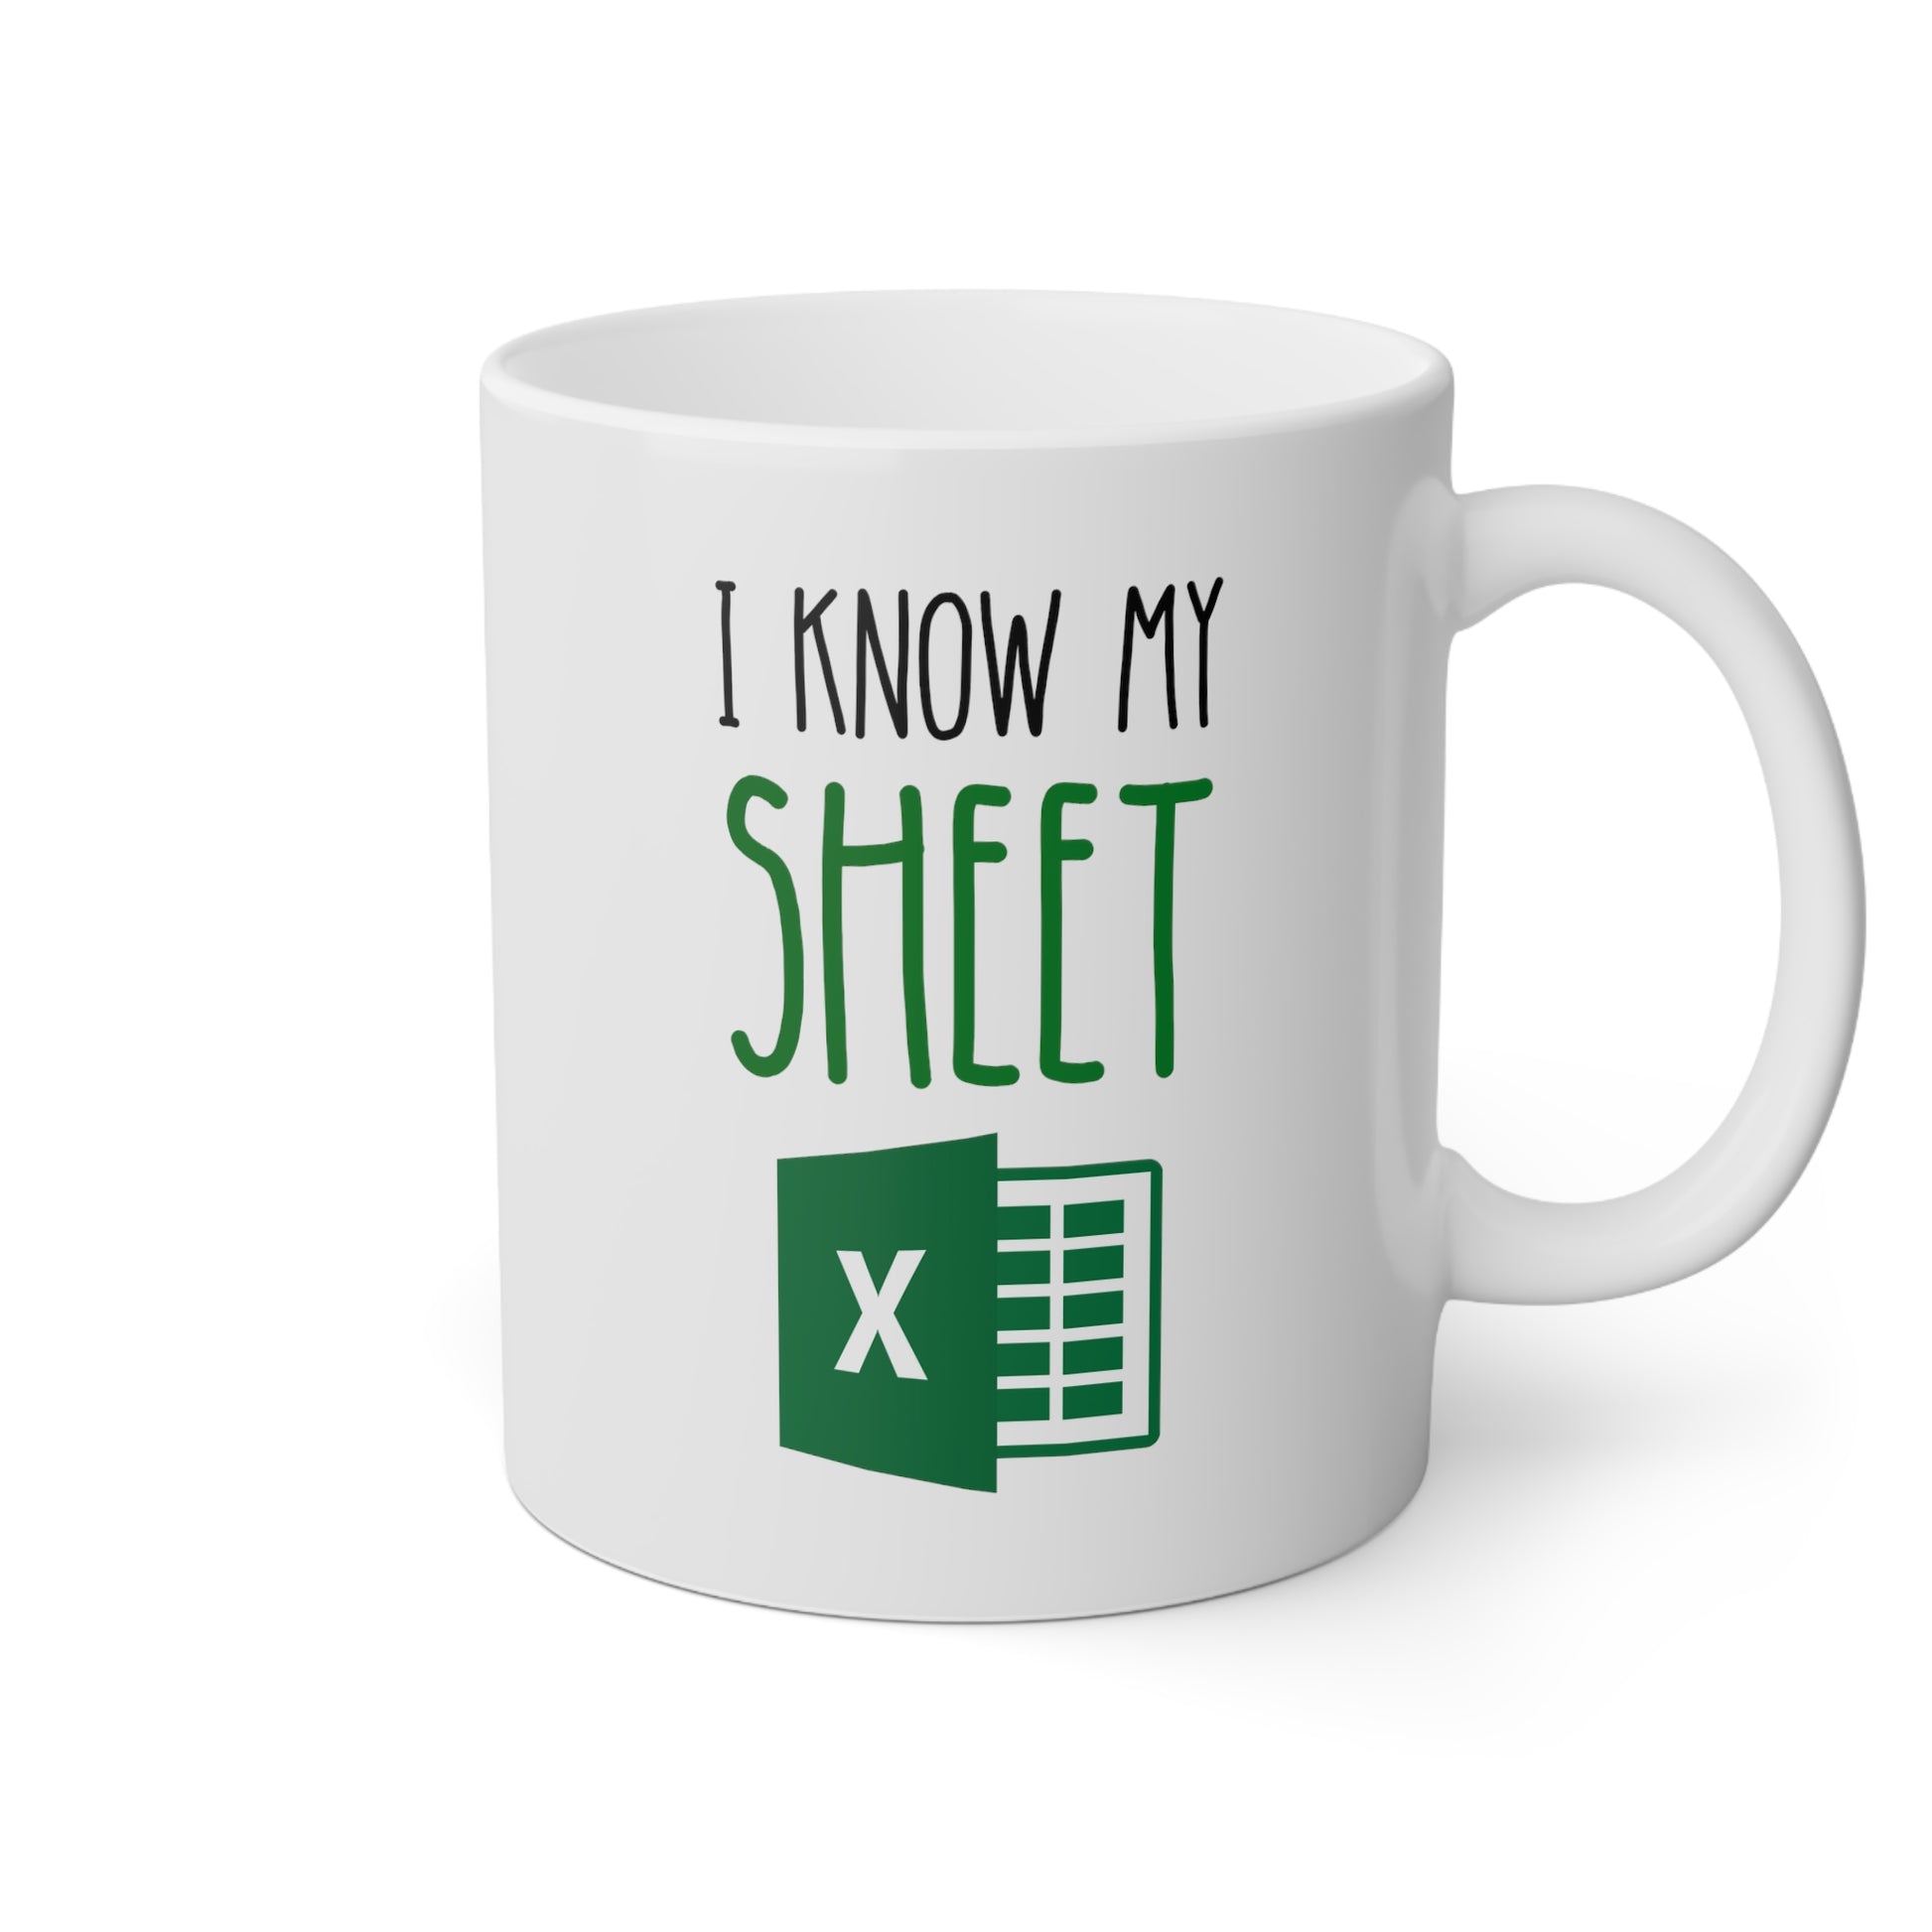 I Know My Sheet 11oz white funny large coffee mug gift for work colleague spreadsheet accountant office coworker excel waveywares wavey wares wavywares wavy wares